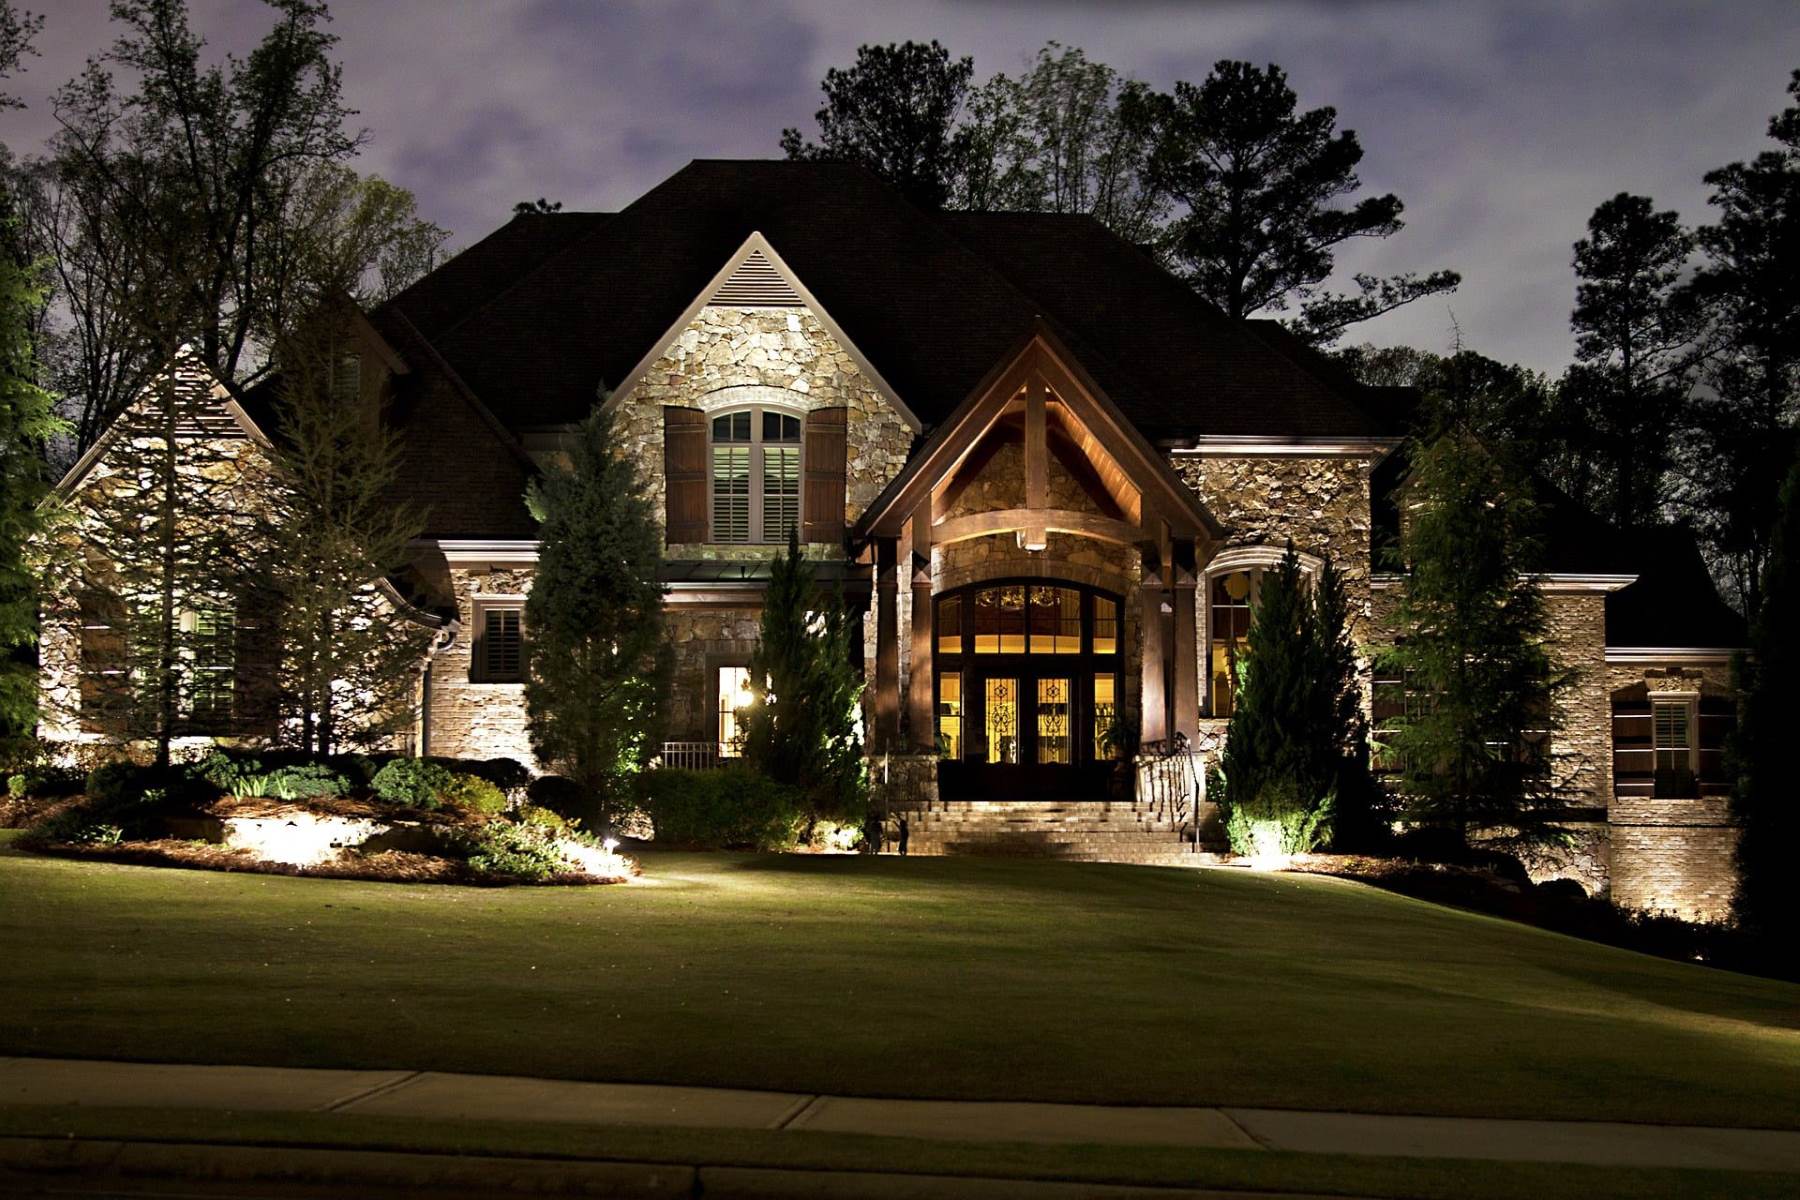 How To Design Exterior Lighting On A House